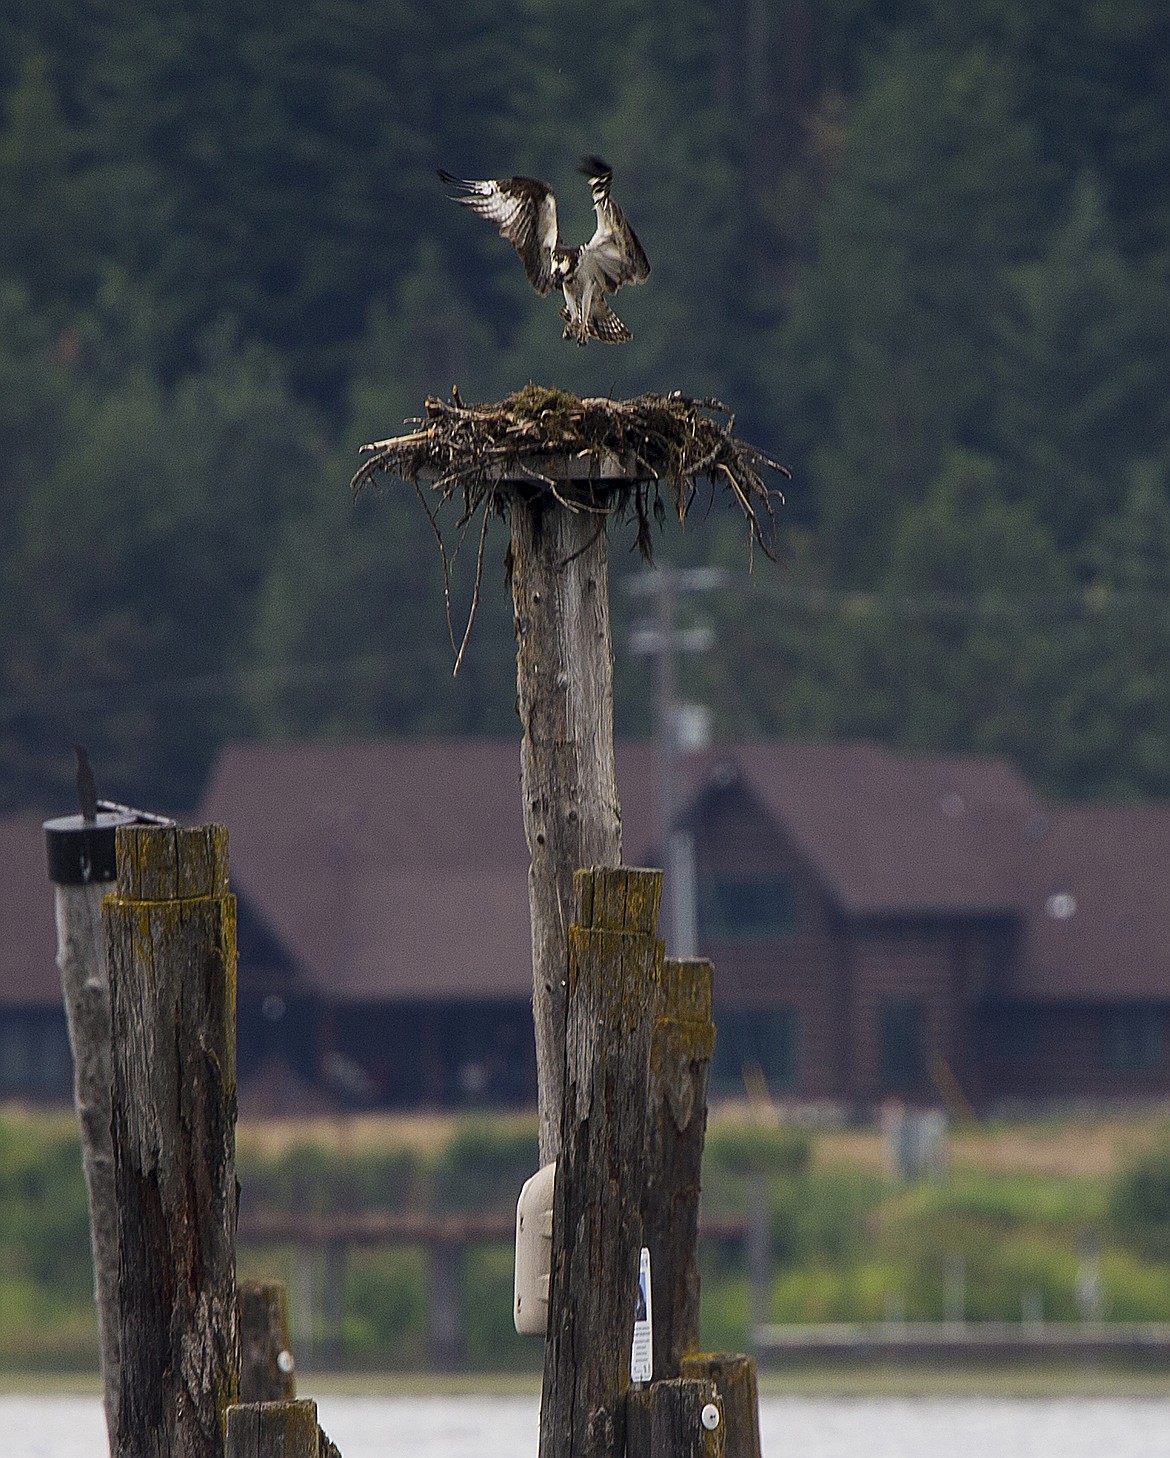 An osprey lands back at its nest on a wooden post in Cougar Bay during a Osprey Cruise in 2016. (LOREN BENOIT/Press File)